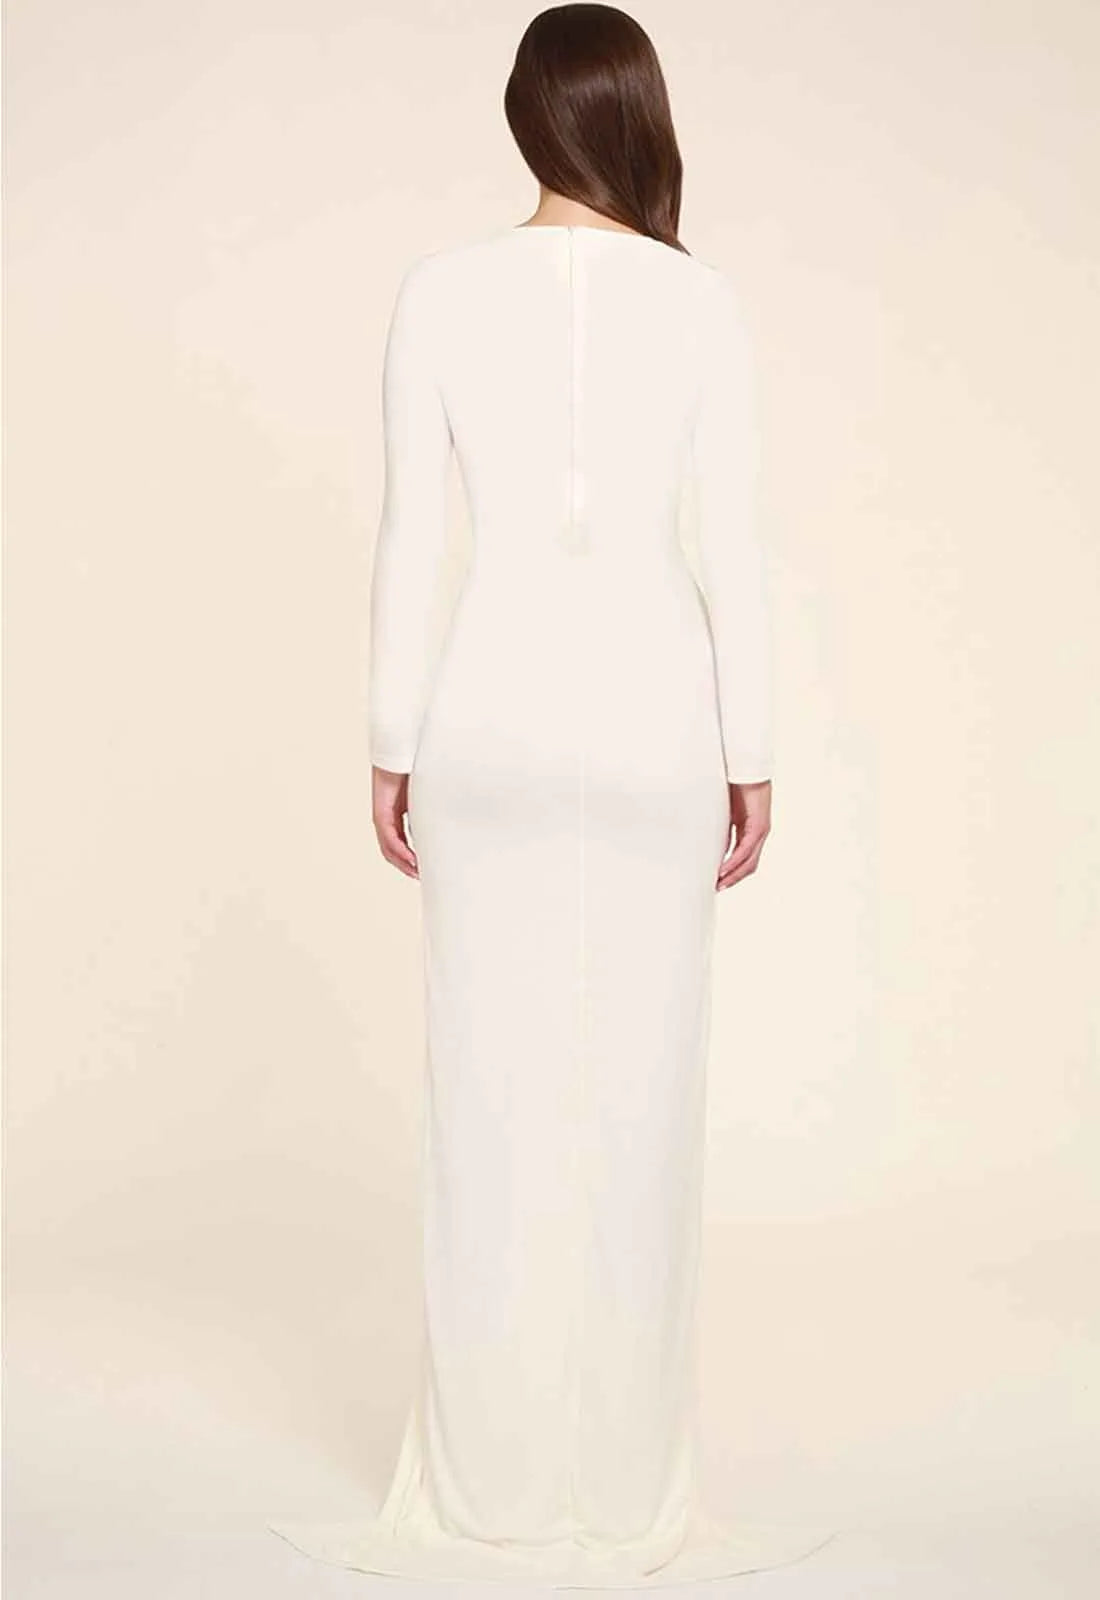 Honor Gold Jessica Long Sleeve Maxi Dress in White-23906